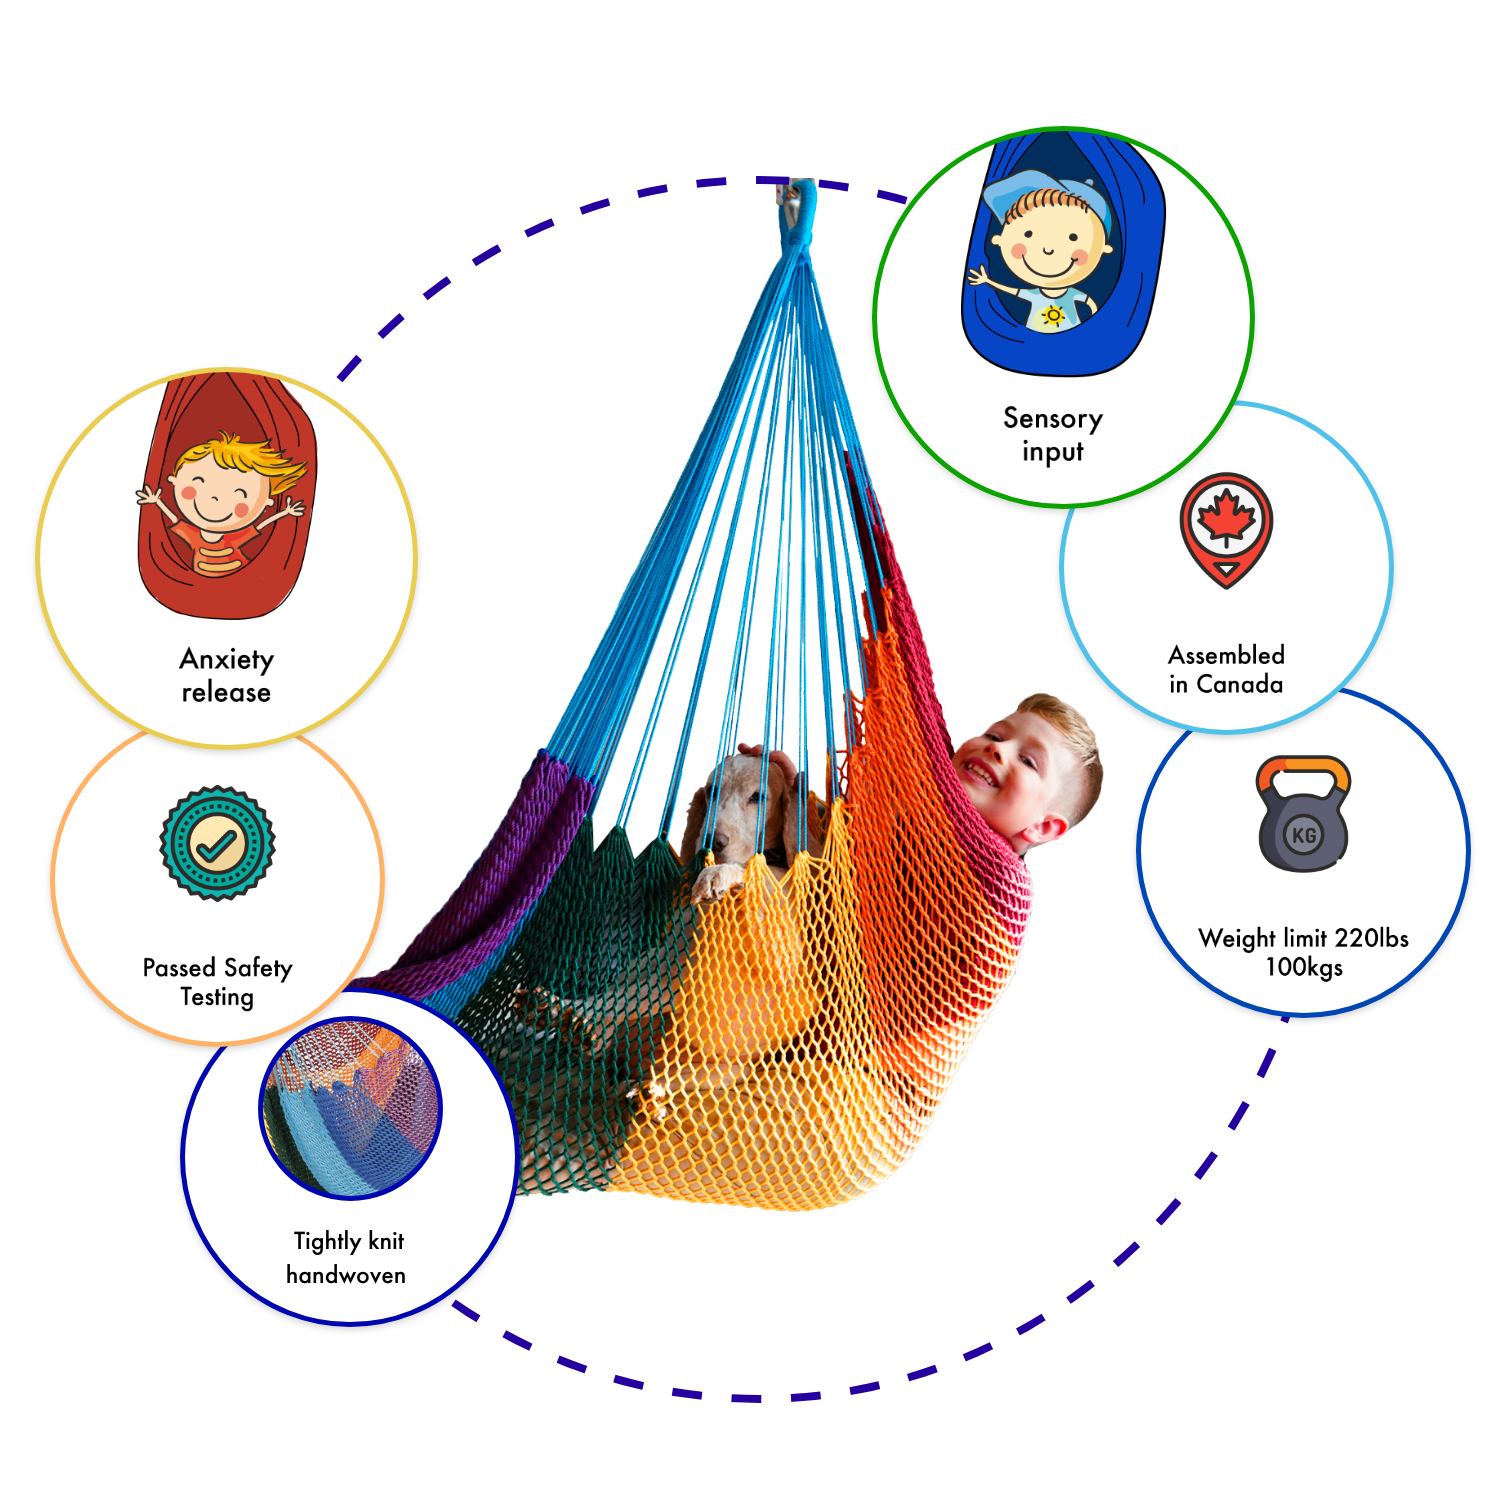 Infographics about hammock swing. A boy and his puppy are using a hammock swing in rainbow colour with benefits and features listed around: anxiety release, sensory input, passed safety testing, assembled in canada, tightly knit handwoven material, weight limit 220 lbs